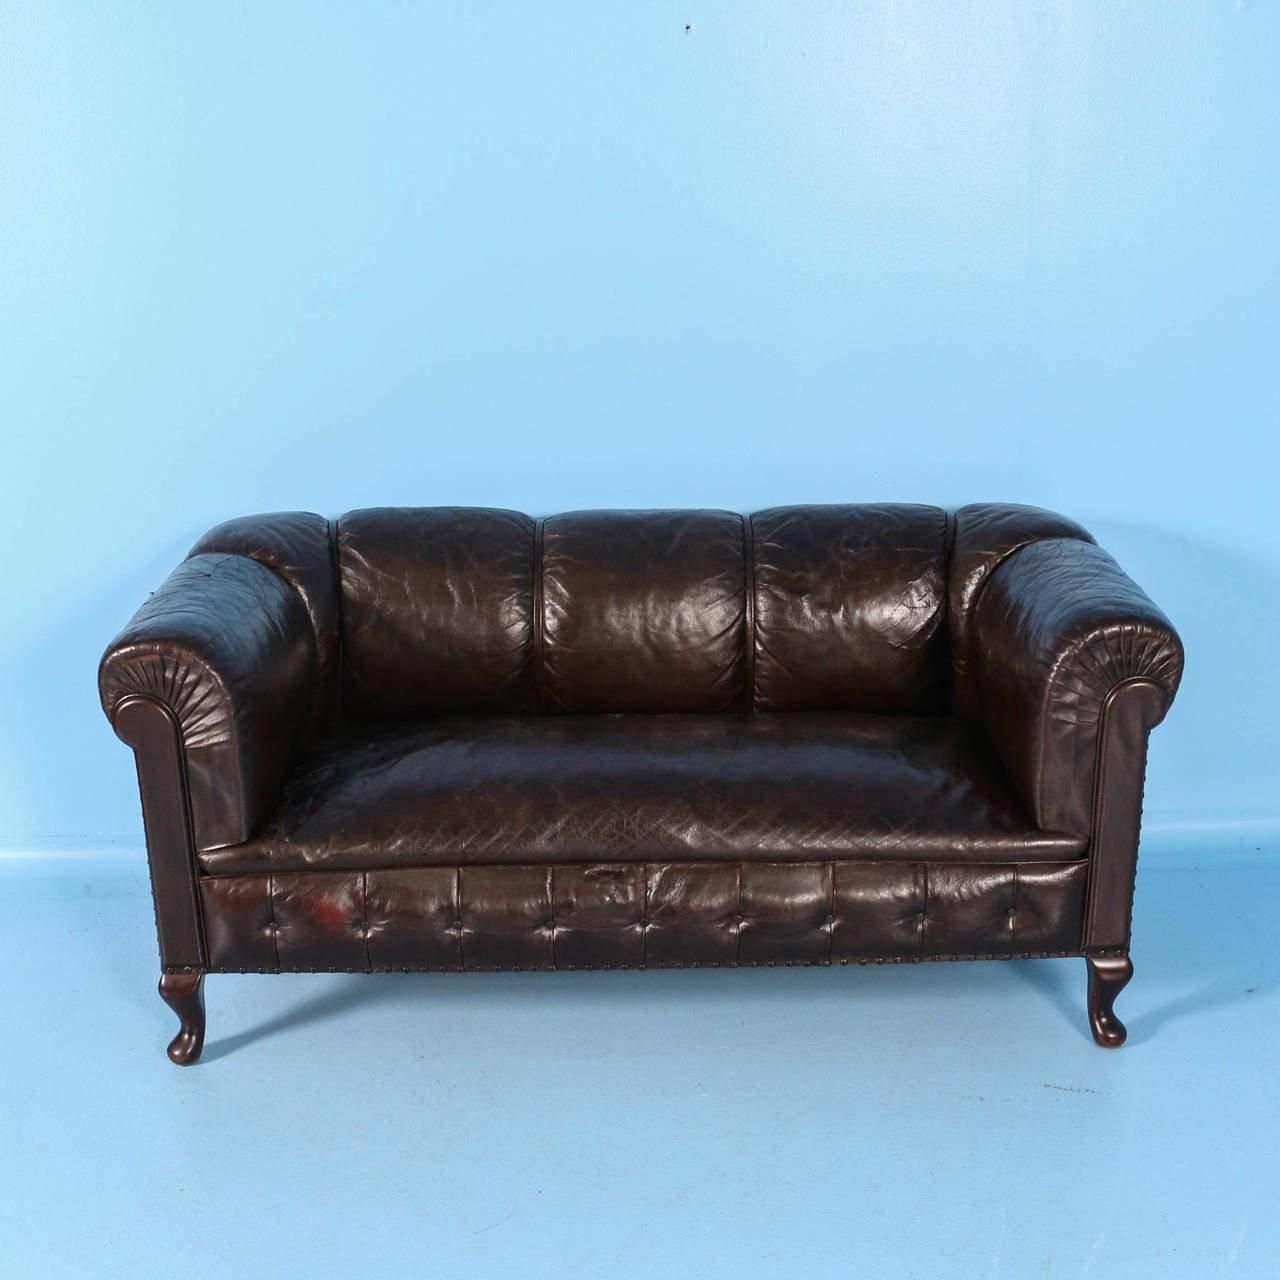 Small Vintage Chesterfield Sofa, England, Circa 1920 – 1940 At 1stdibs Pertaining To Small Chesterfield Sofas (View 16 of 20)